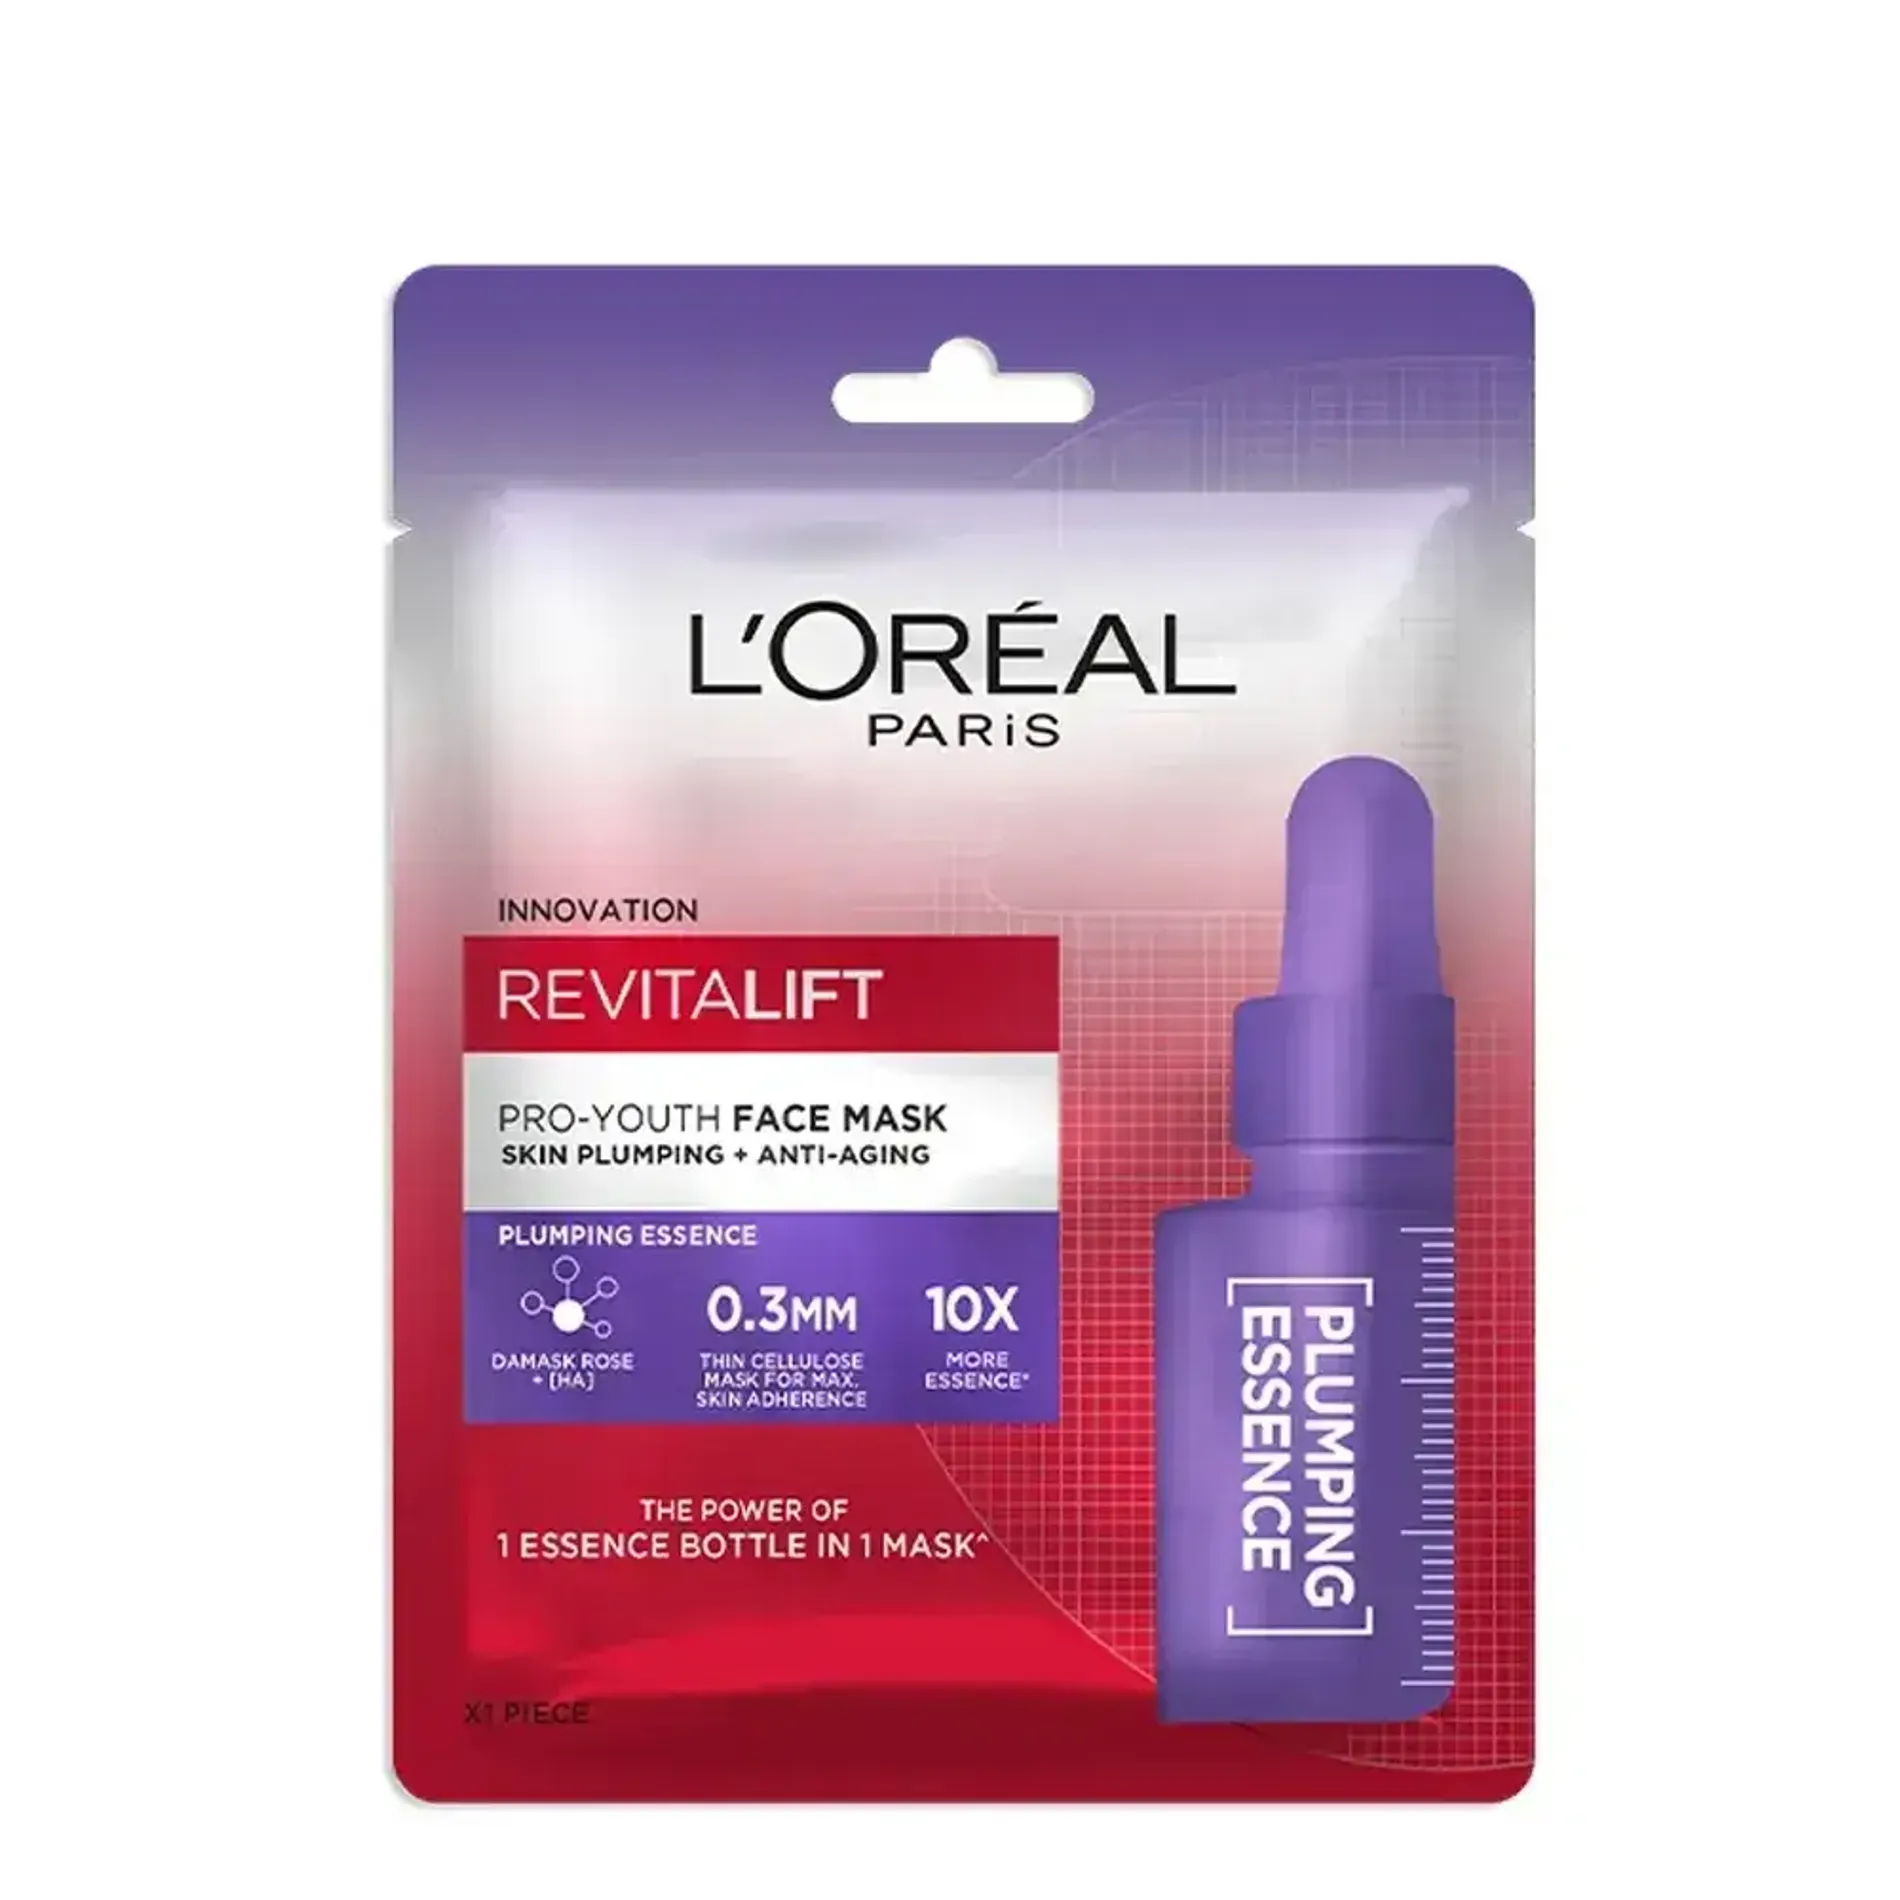 mat-na-duong-am-l-oreal-revitalift-pro-youth-face-mask-plumping-essence-30g-1